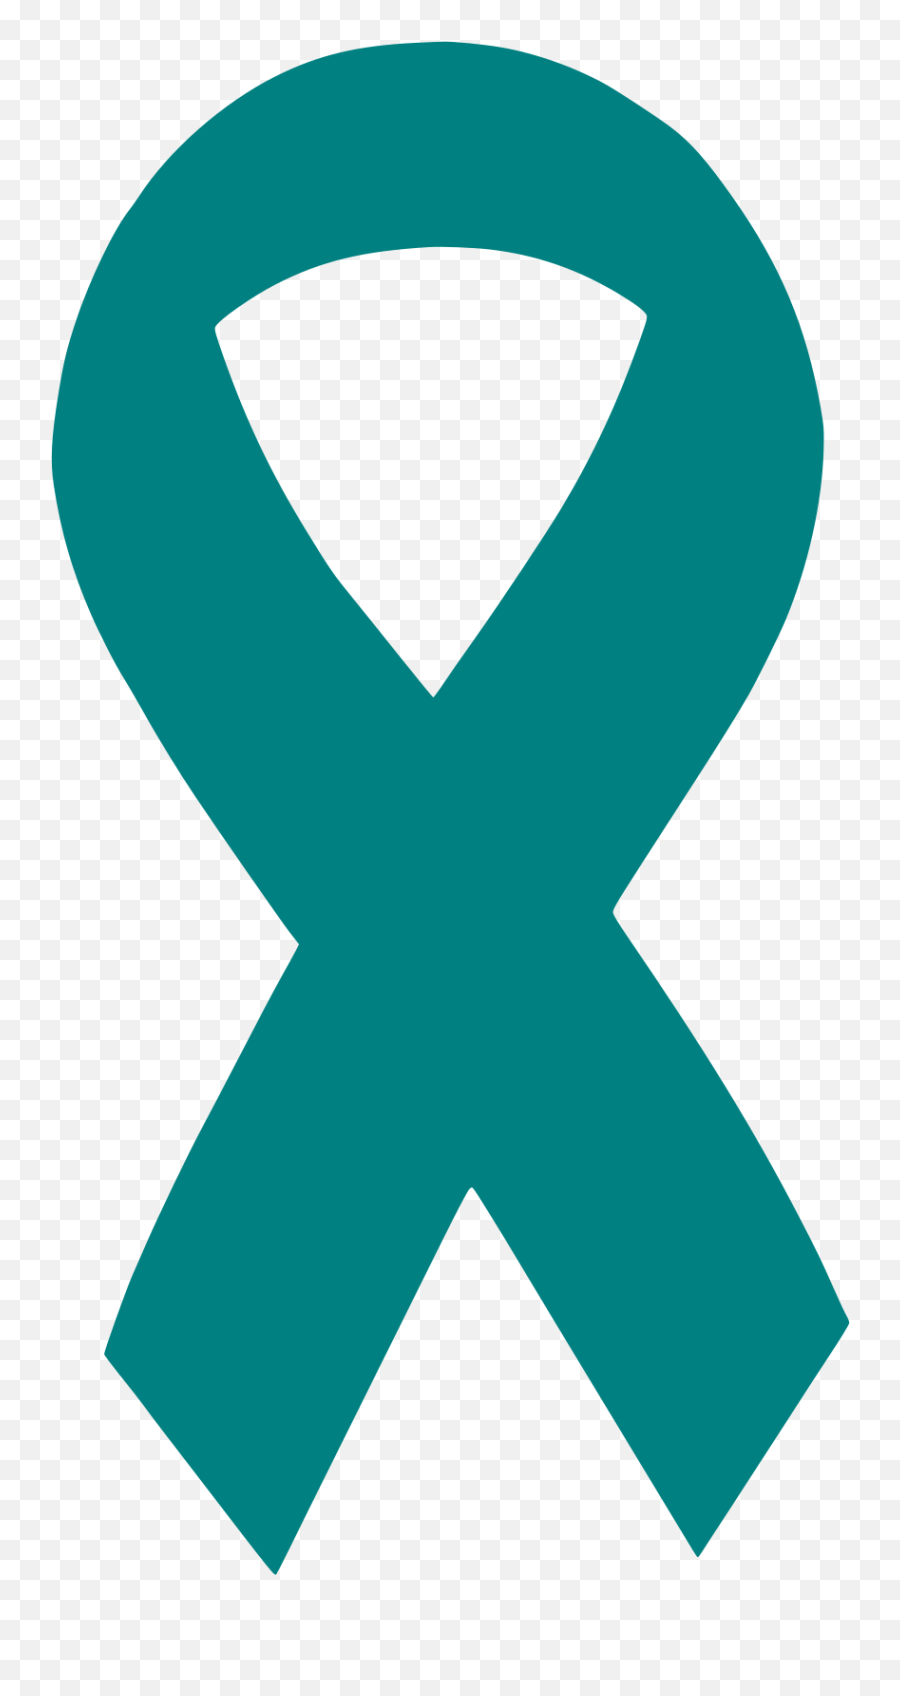 Fileteal Awareness Ribbon Small Iconsvg - Wikimedia Commons Vertical Png,Small File Icon